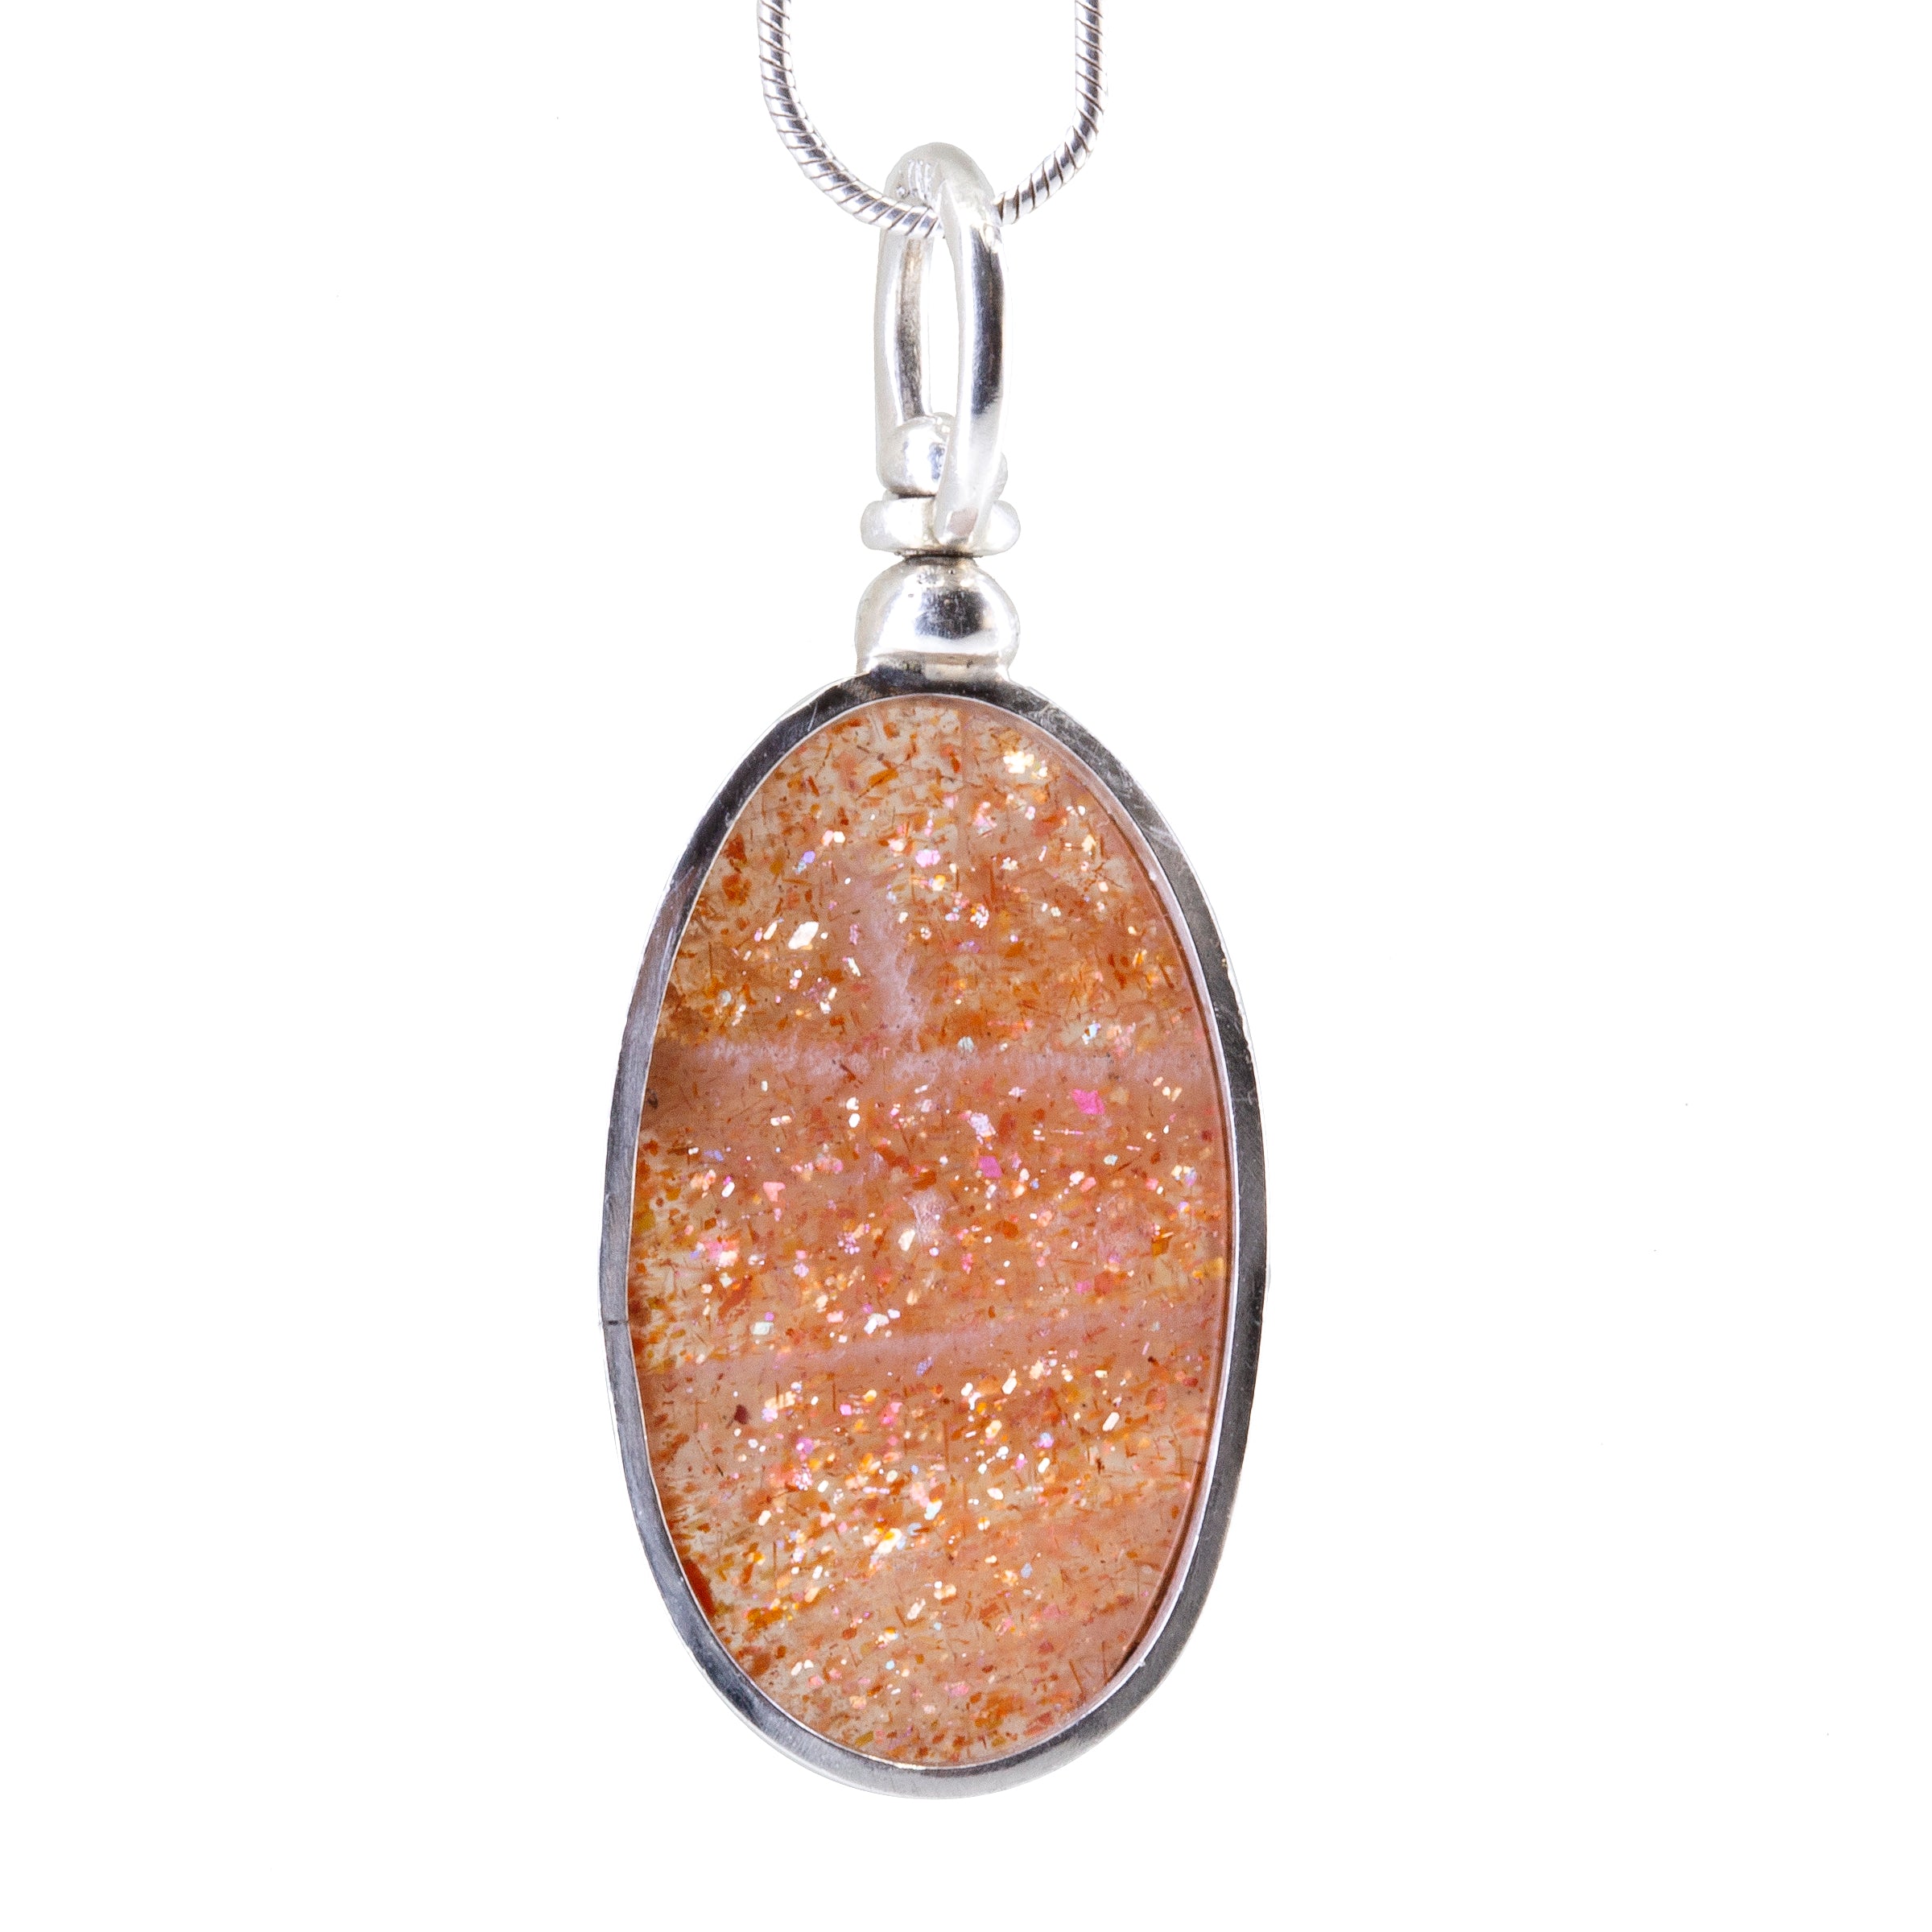 Sunstone 23.41 mm 9.48 ct Oval Cabochon Sterling Silver Handcrafted Swivel Pendant - DDO-139 - Crystalarium